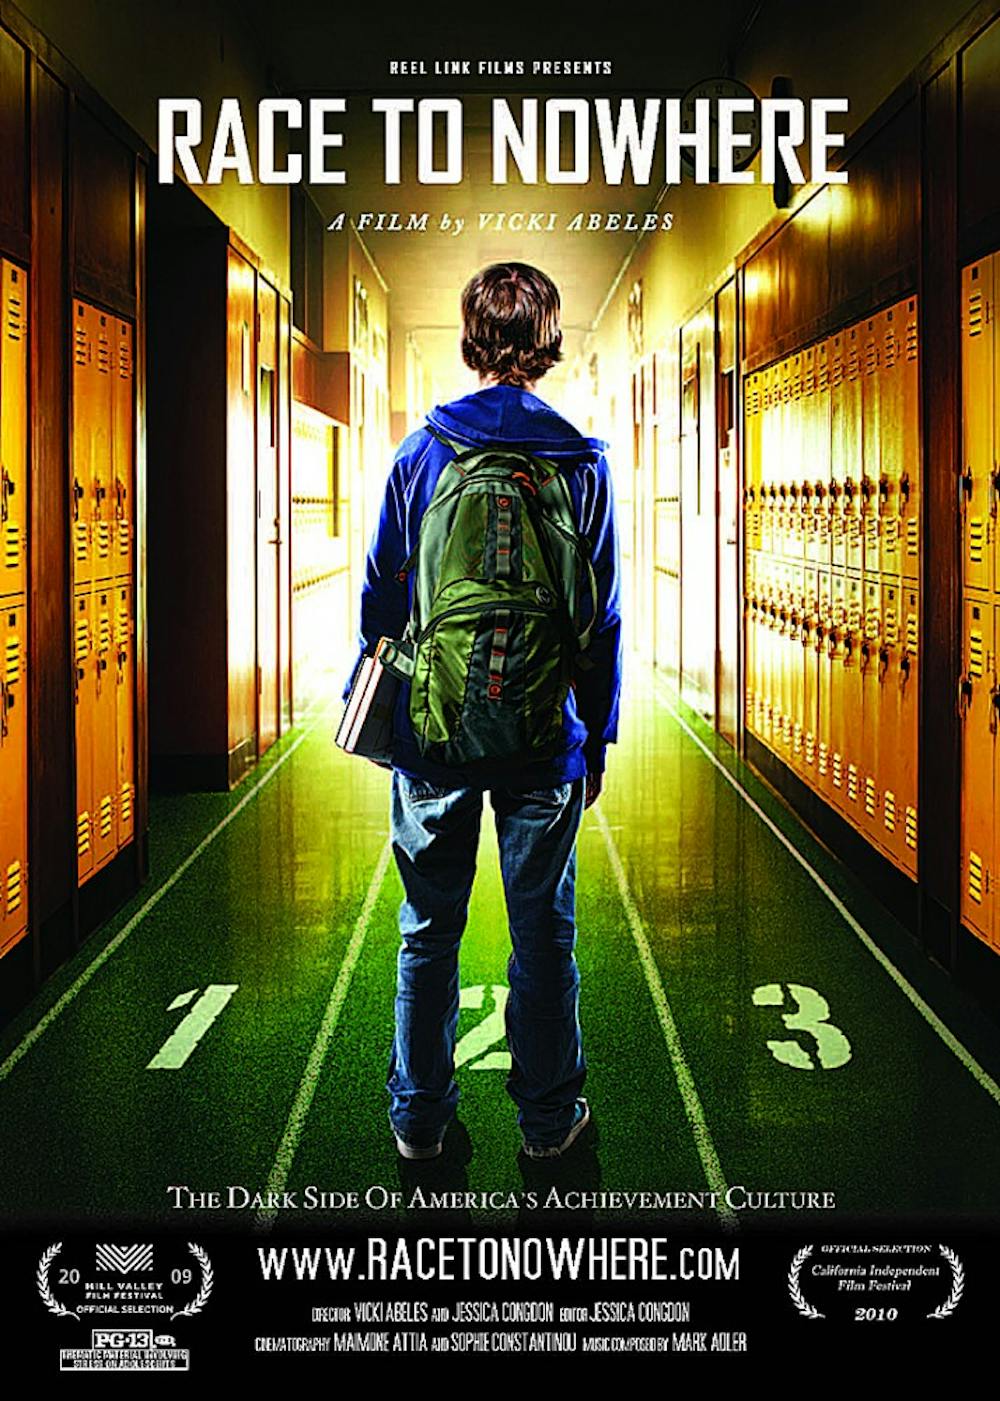 Film tackles education problems